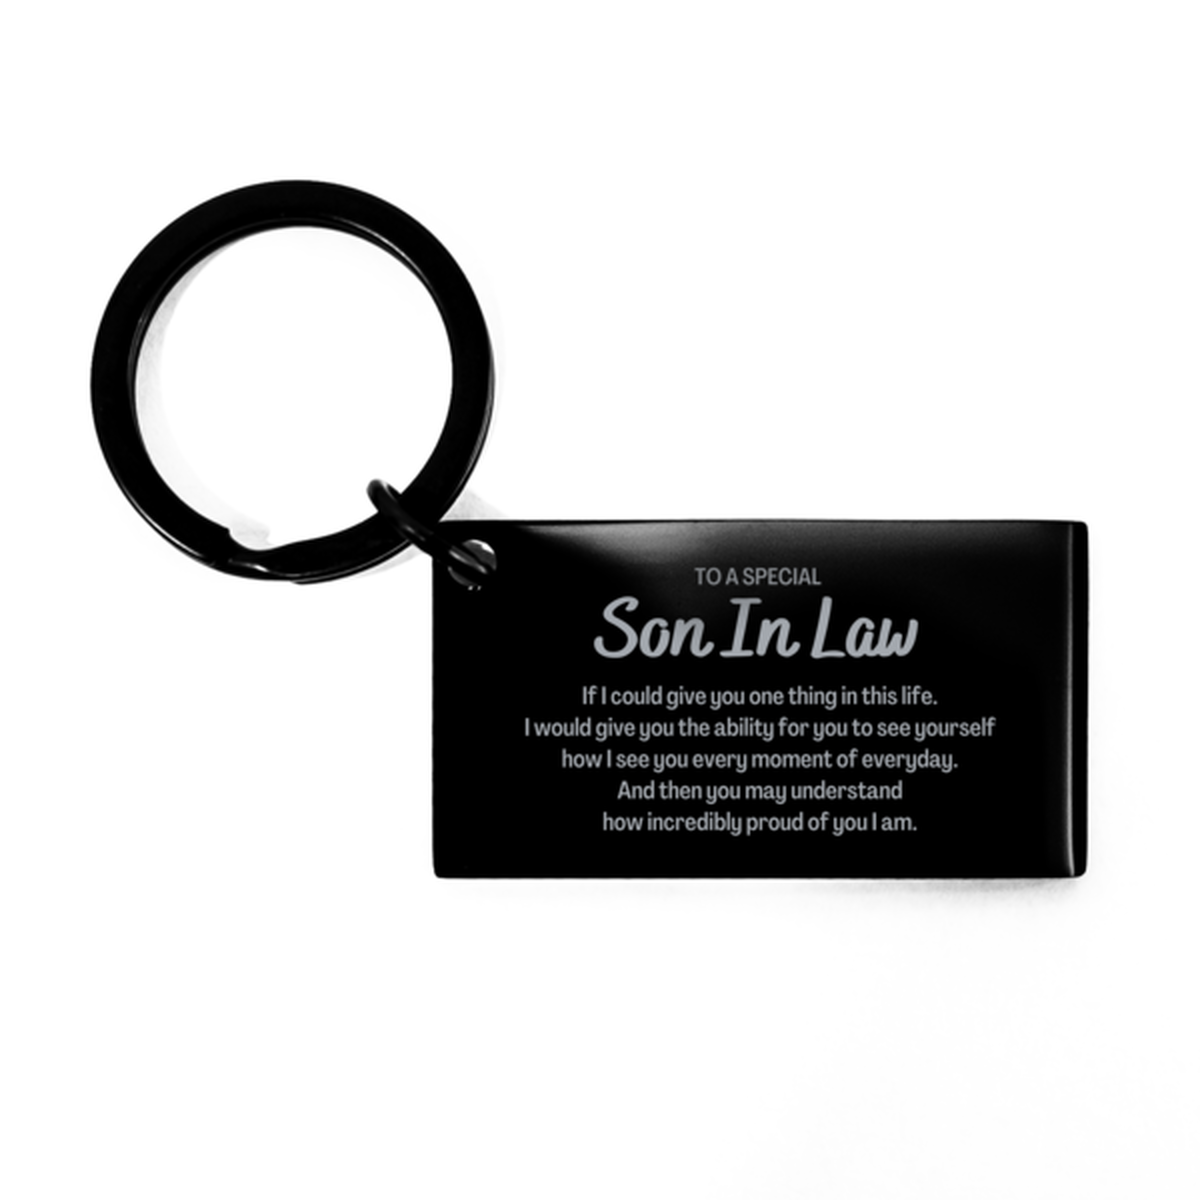 To My Son In Law Keychain, Gifts For Son In Law Engraved, Inspirational Gifts for Christmas Birthday, Epic Gifts for Son In Law To A Special Son In Law how incredibly proud of you I am